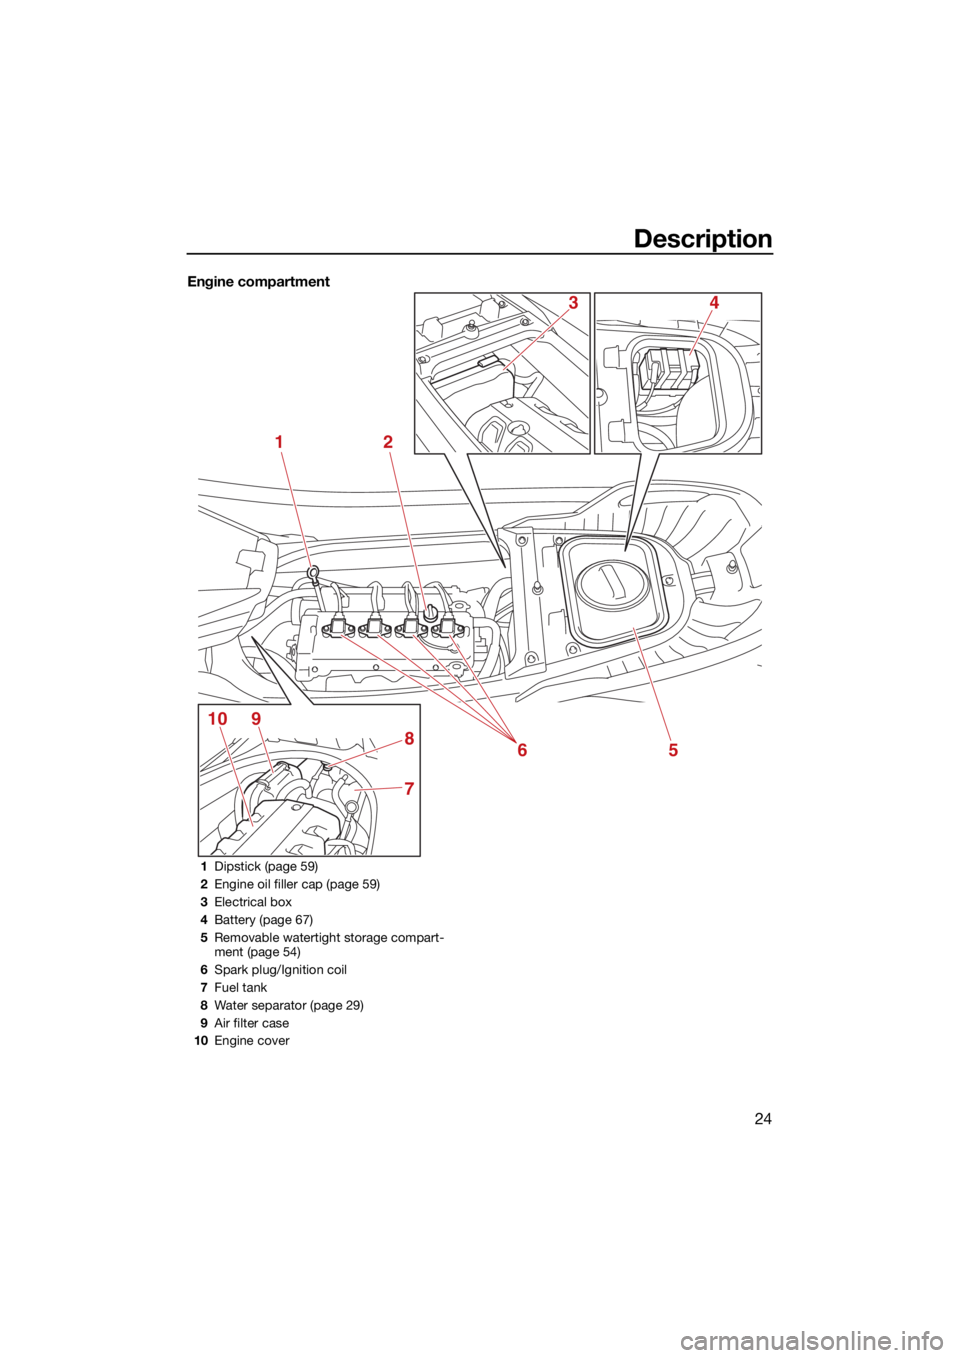 YAMAHA FX HO 2021  Owners Manual Description
24
Engine compartment
12
5
7
8
9106
43
1Dipstick (page 59)
2 Engine oil filler cap (page 59)
3 Electrical box
4 Battery (page 67)
5 Removable watertight storage compart-
ment (page 54)
6 S